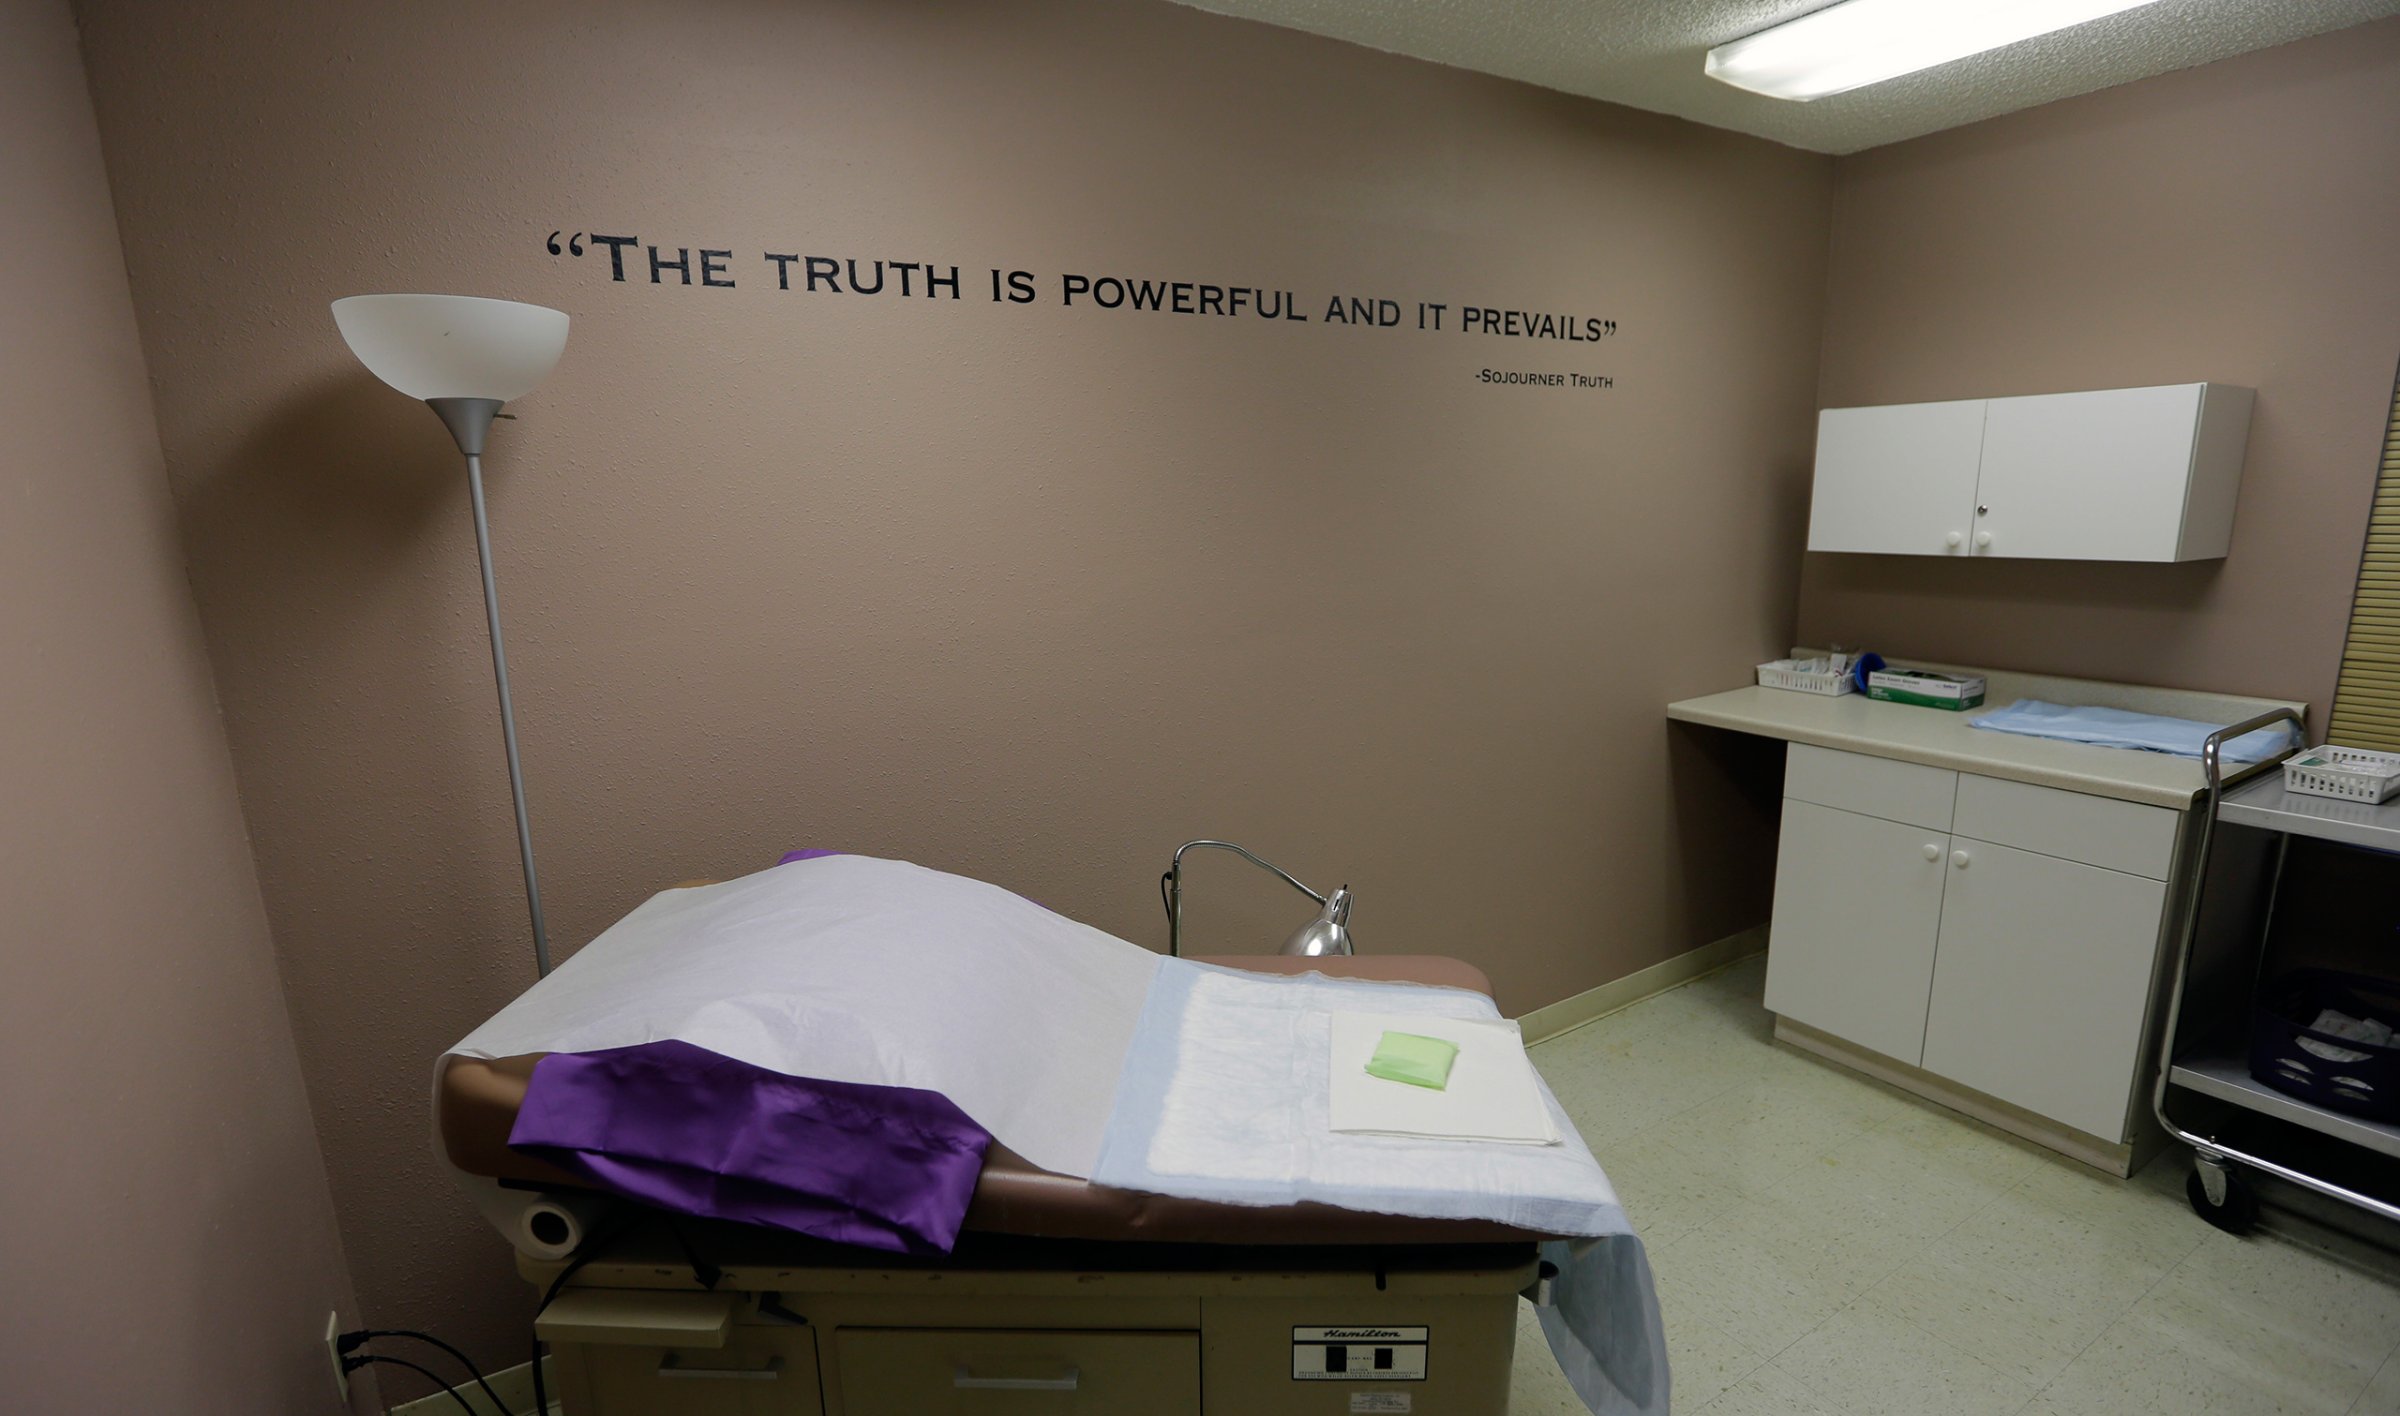 A room formally used as an examination room for abortions is seen at Choice Clinic, formerly Whole Woman's Health Clinic, in Austin on June 27, 2016.